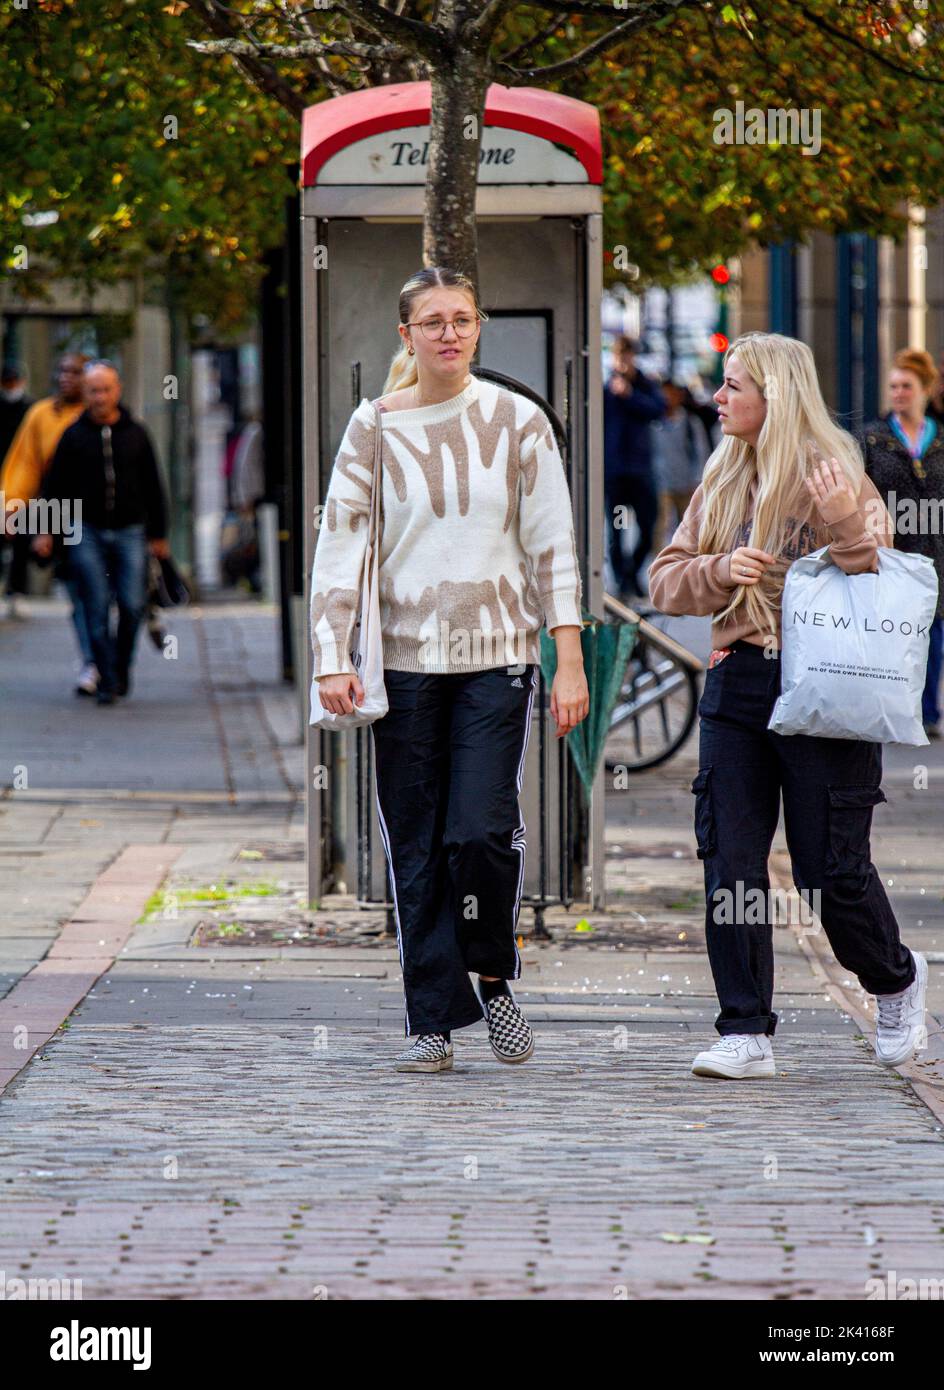 Dundee, Tayside, Scotland, UK. 29th Sep, 2022. UK Weather: Temperatures in some parts of Northeast Scotland reached 18°C on this bright and warm Autumn Day. Local fashionable women are out and about shopping in Dundee city centre while also enjoying the warm late September weather, somewhat cautiously spending their money due to the extremely high cost of living. Credit: Dundee Photographics/Alamy Live News Stock Photo